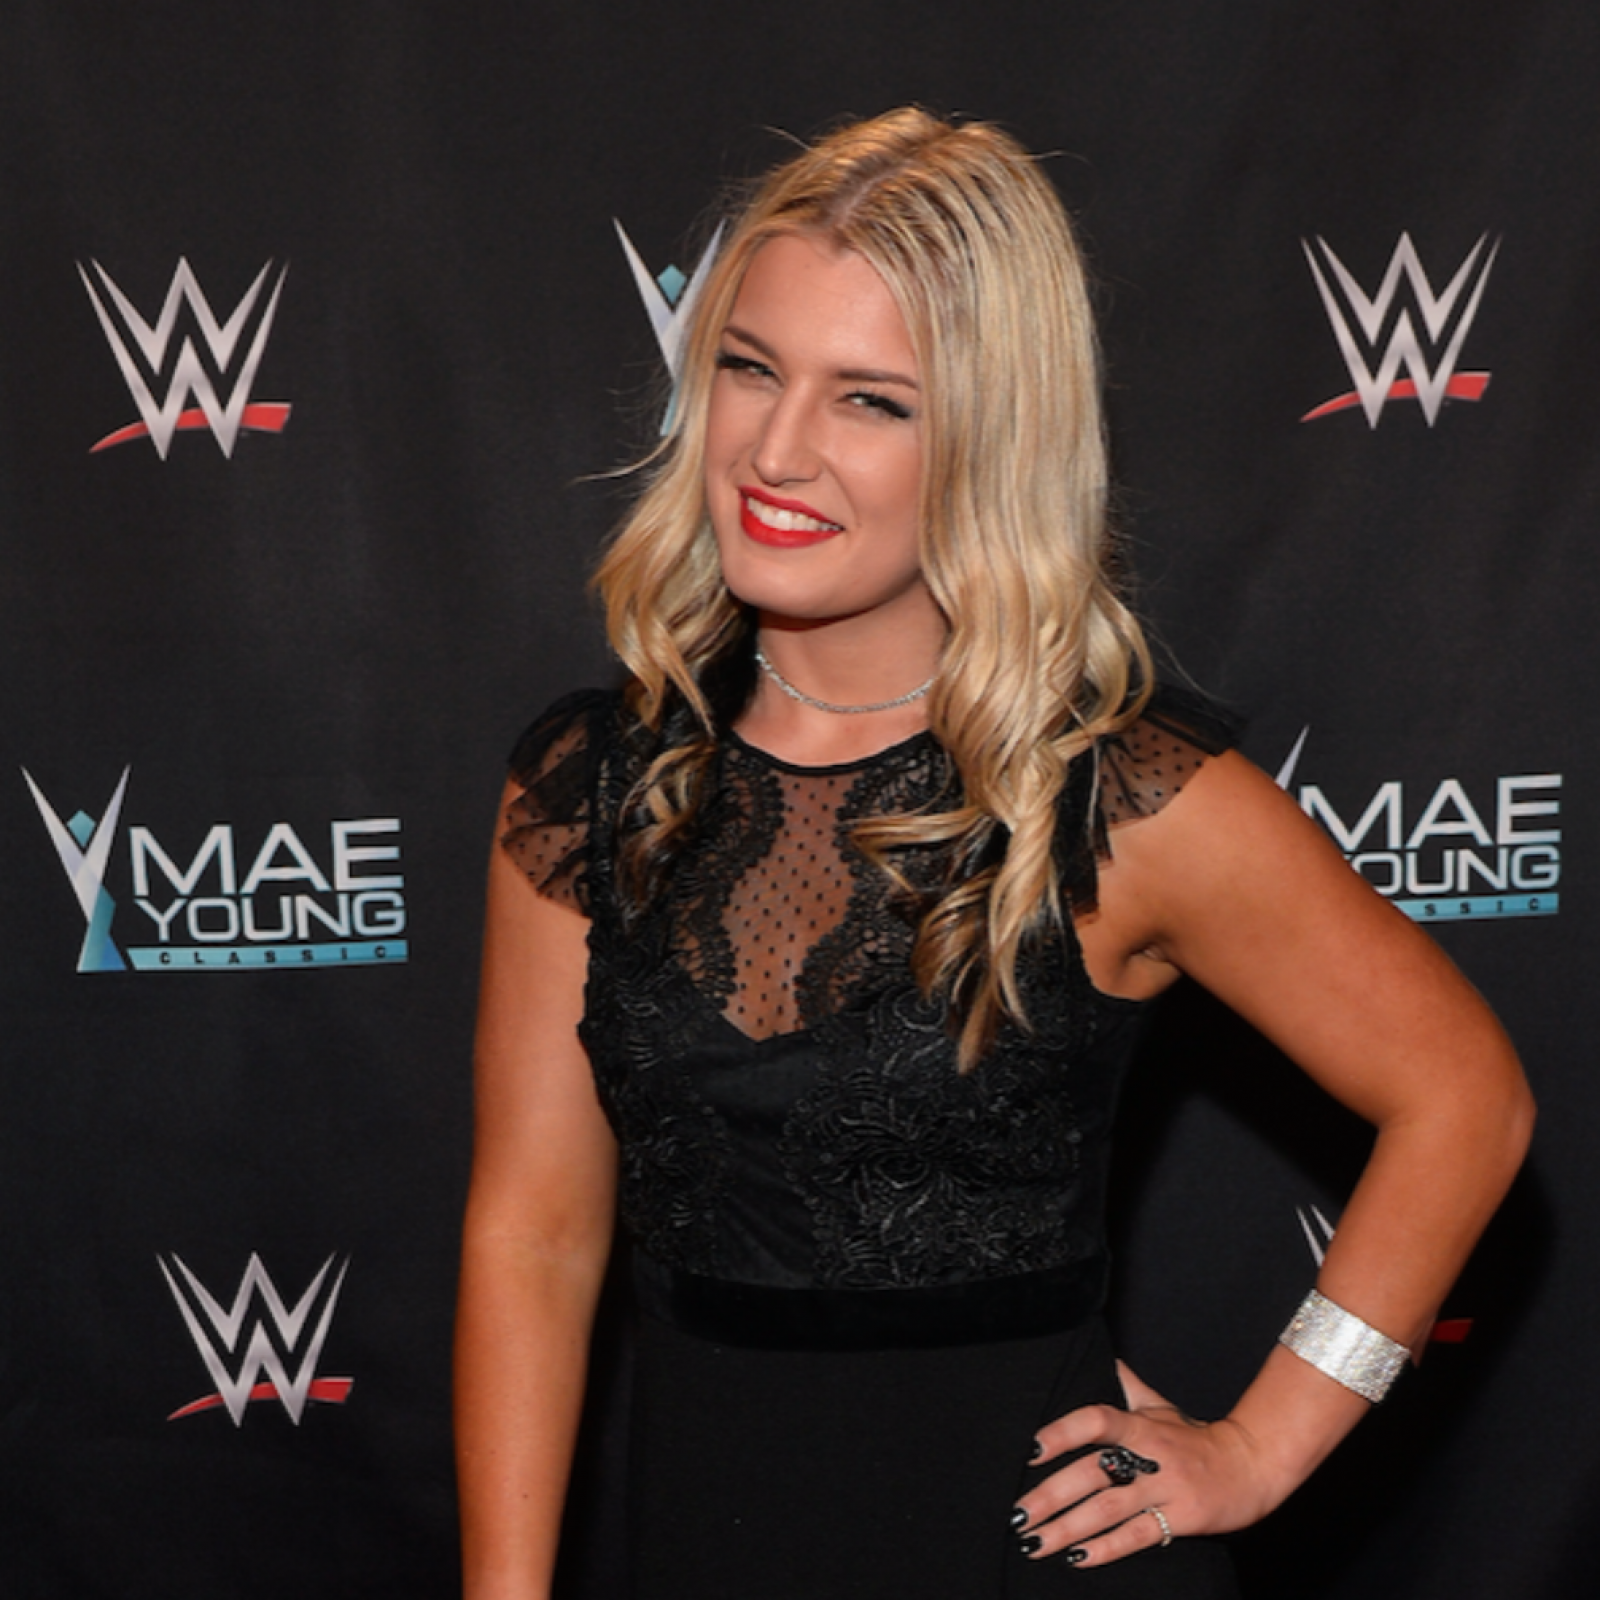 After Nude Photo Leak, WWE's Toni Storm Backed by Paige and Wrestling Fans